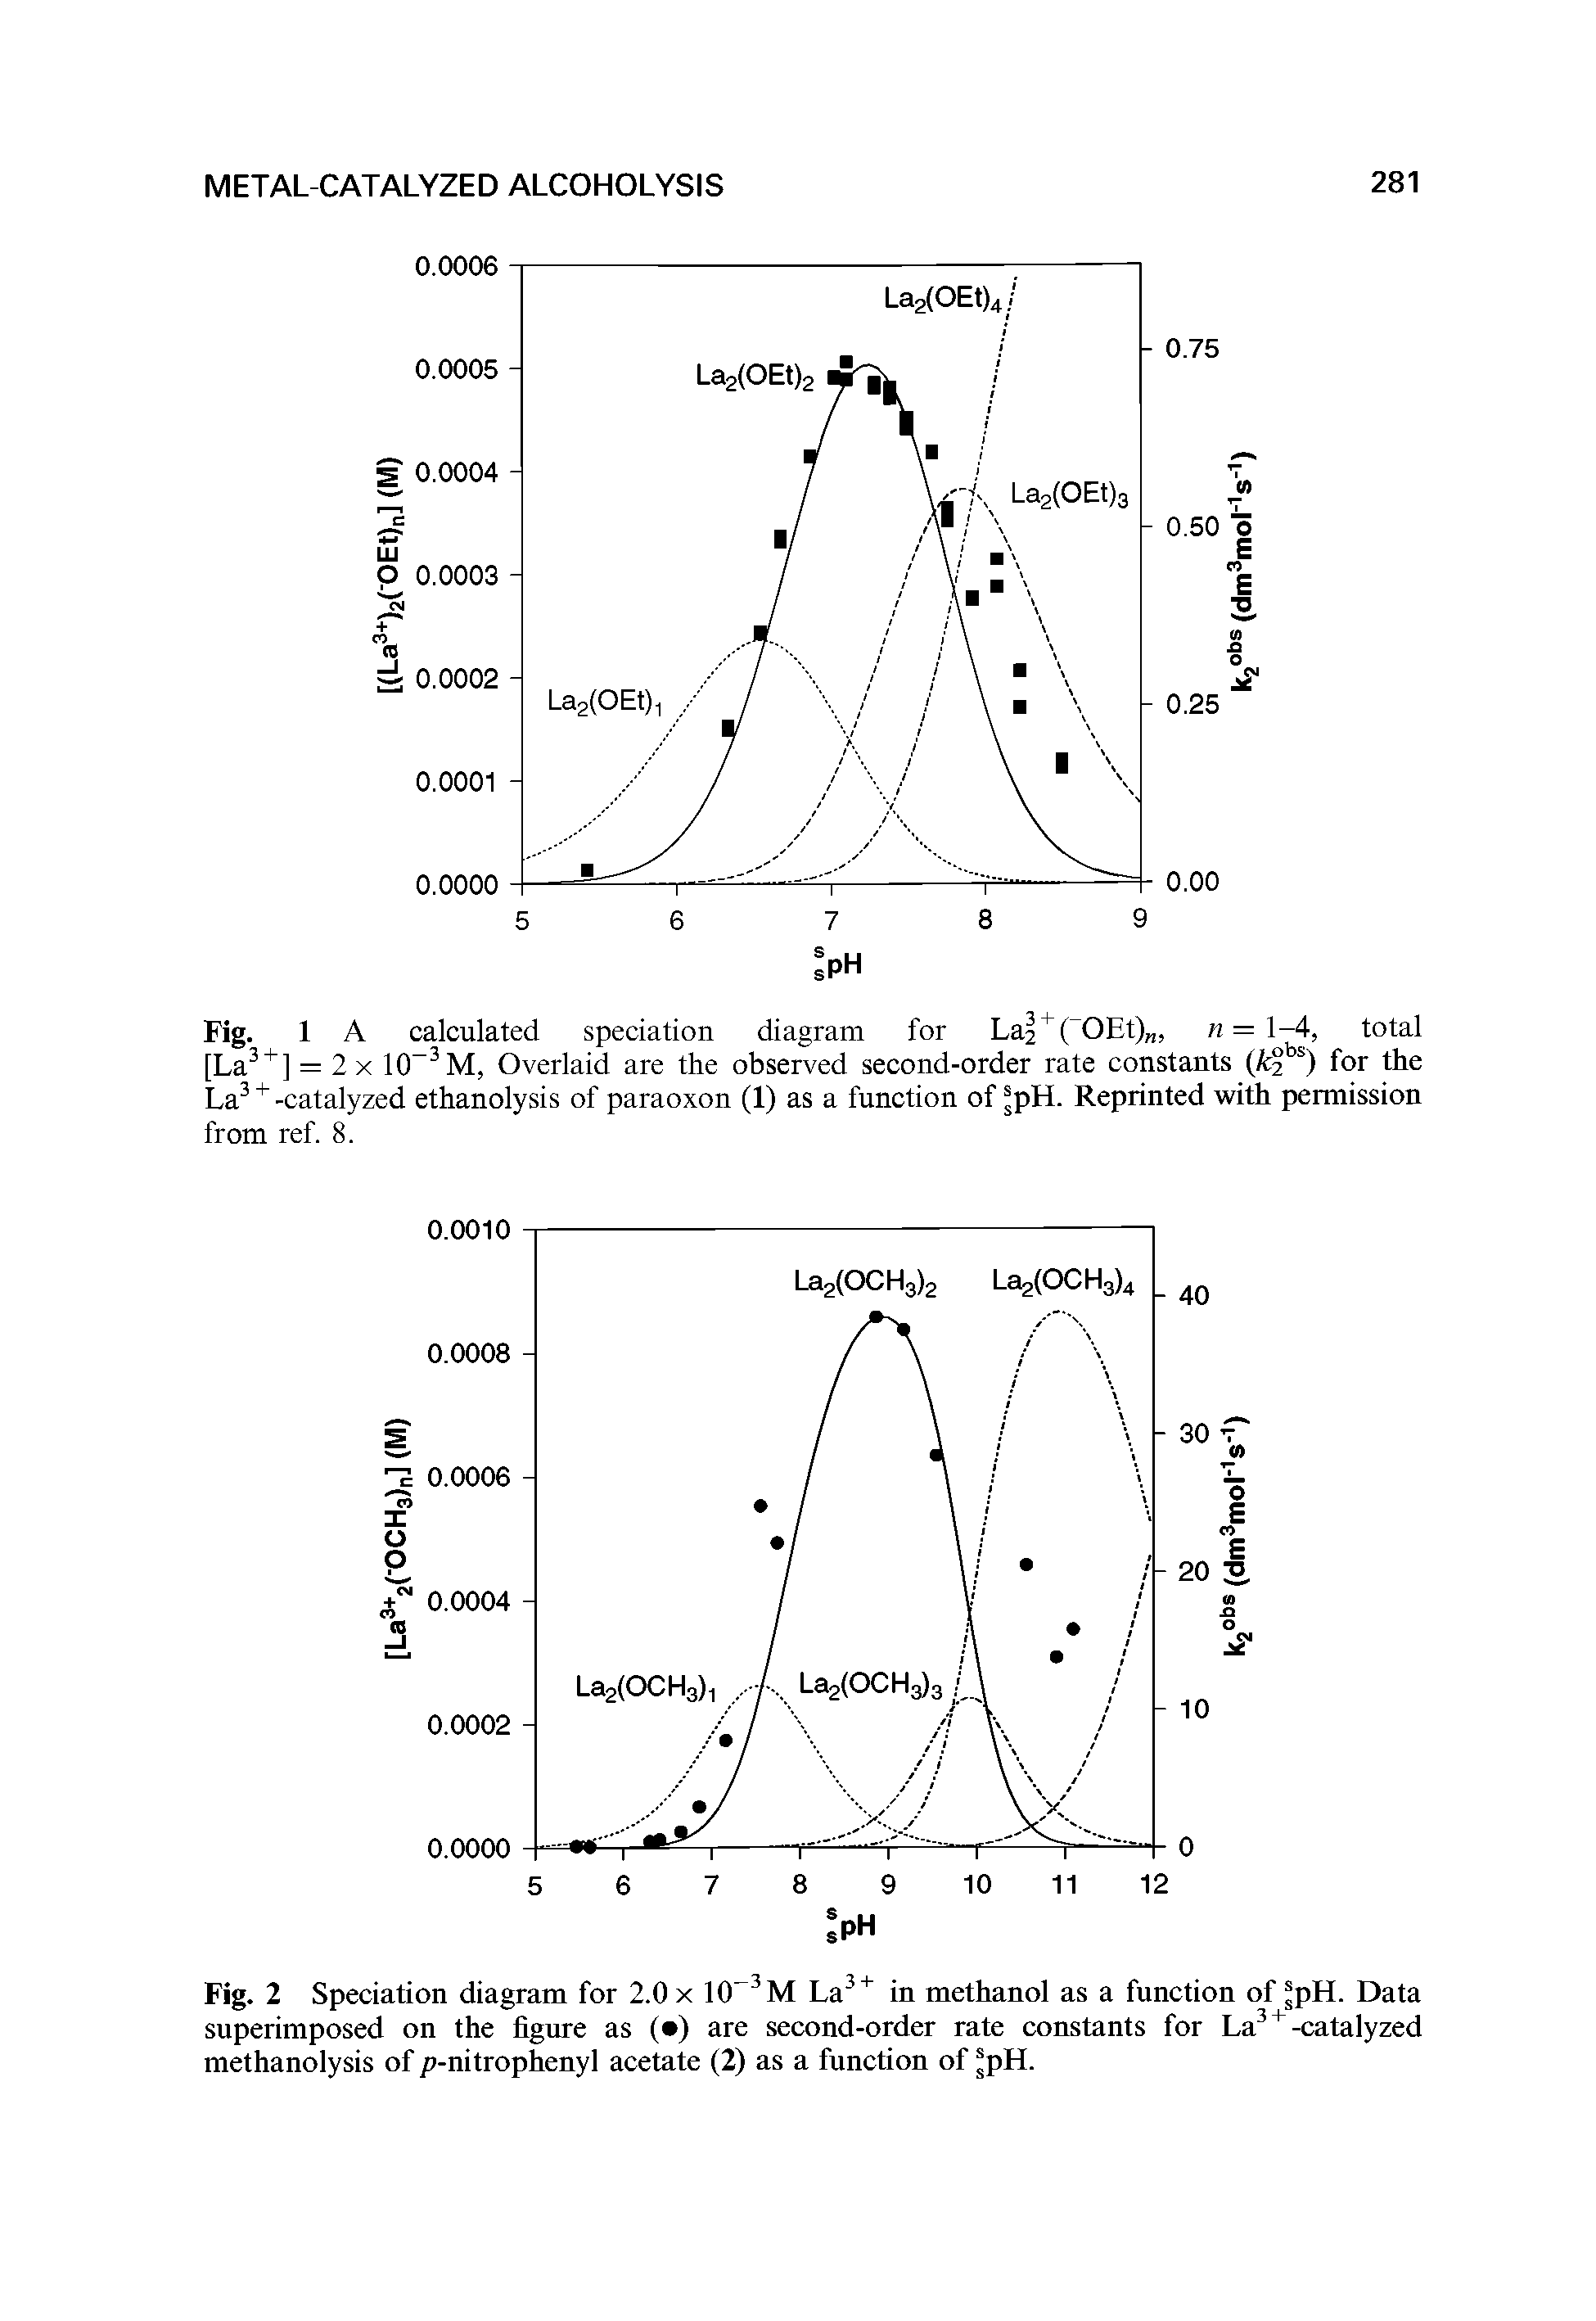 Fig. 2 Speciation diagram for 2.0 x 10" 3 M La3+ in methanol as a function of pH. Data superimposed on the figure as ( ) are second-order rate constants for La3 +-catalyzed methanolysis of p-nitrophenyl acetate (2) as a function of pH.